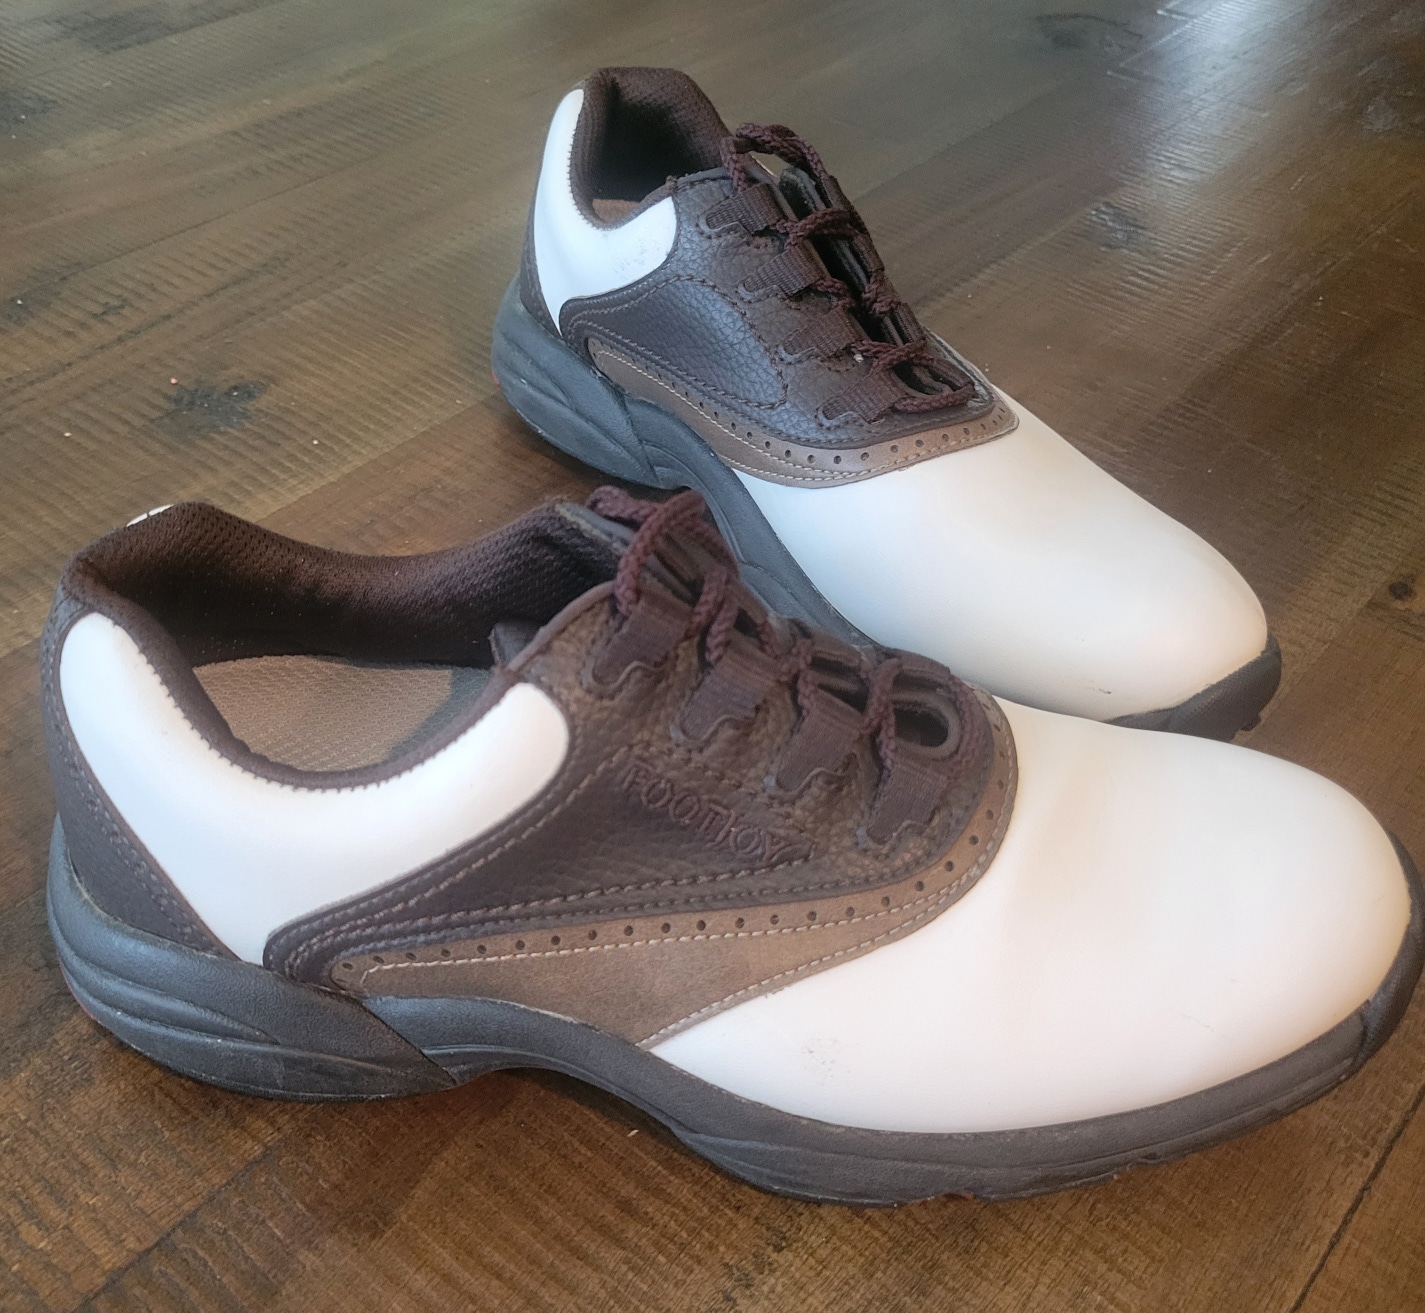 Men's Size 8.0 Footjoy GreenJoys Golf Shoes - GREAT Condition